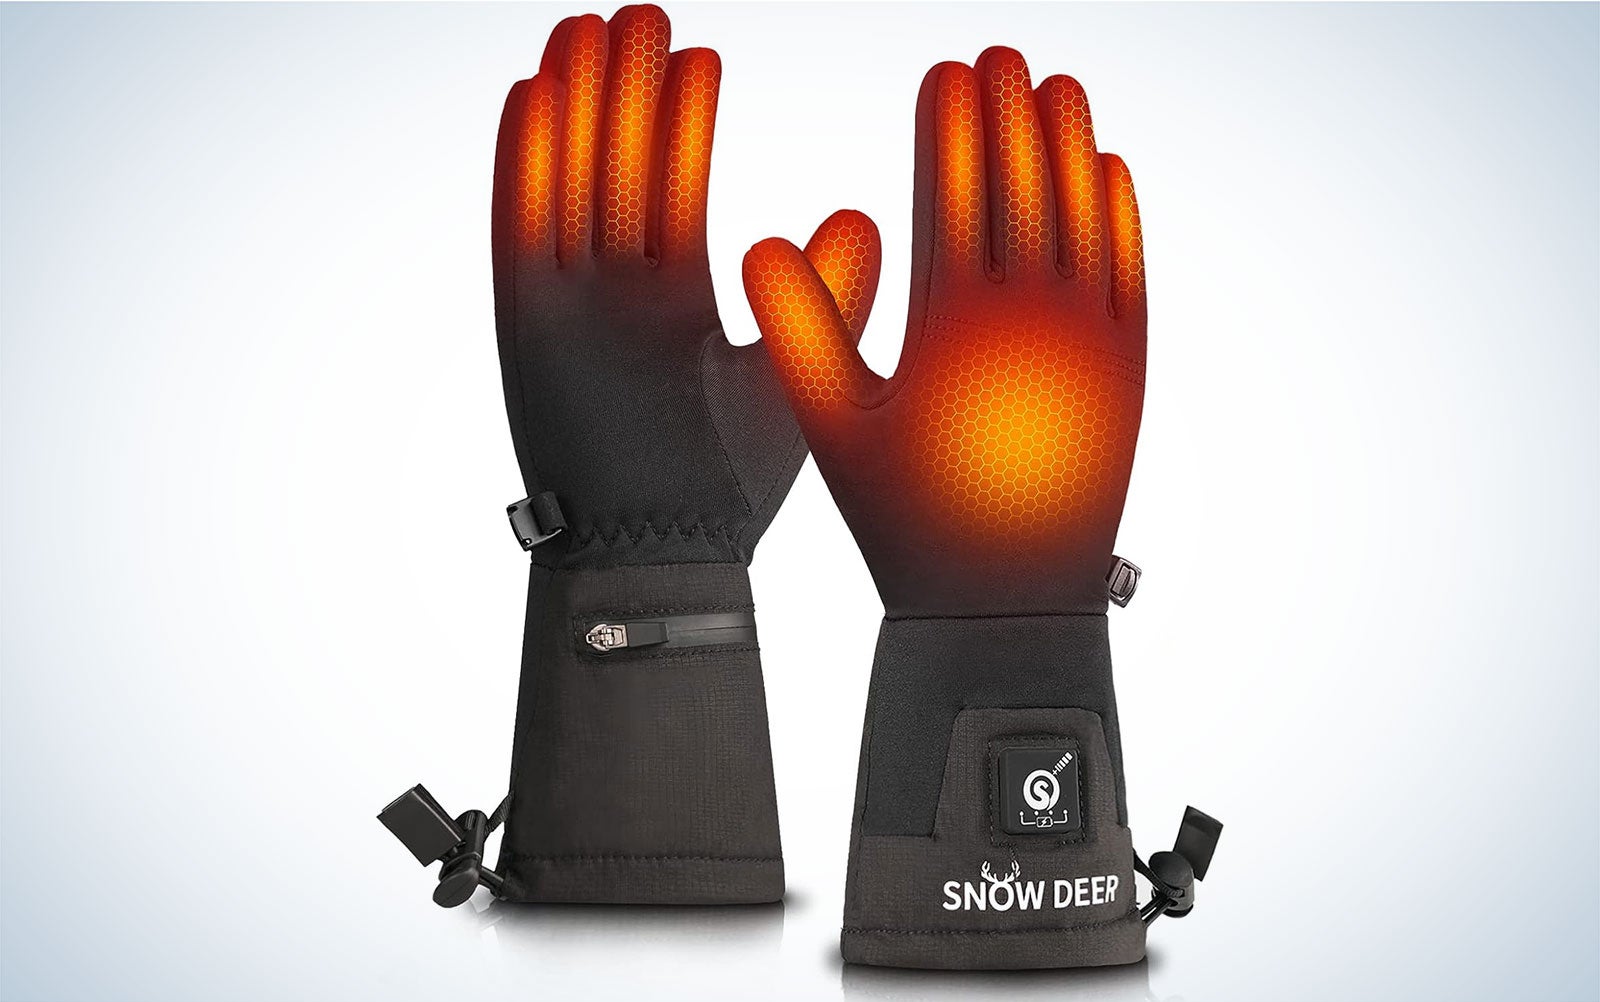 We tested the Snow Deer heated glove liners.